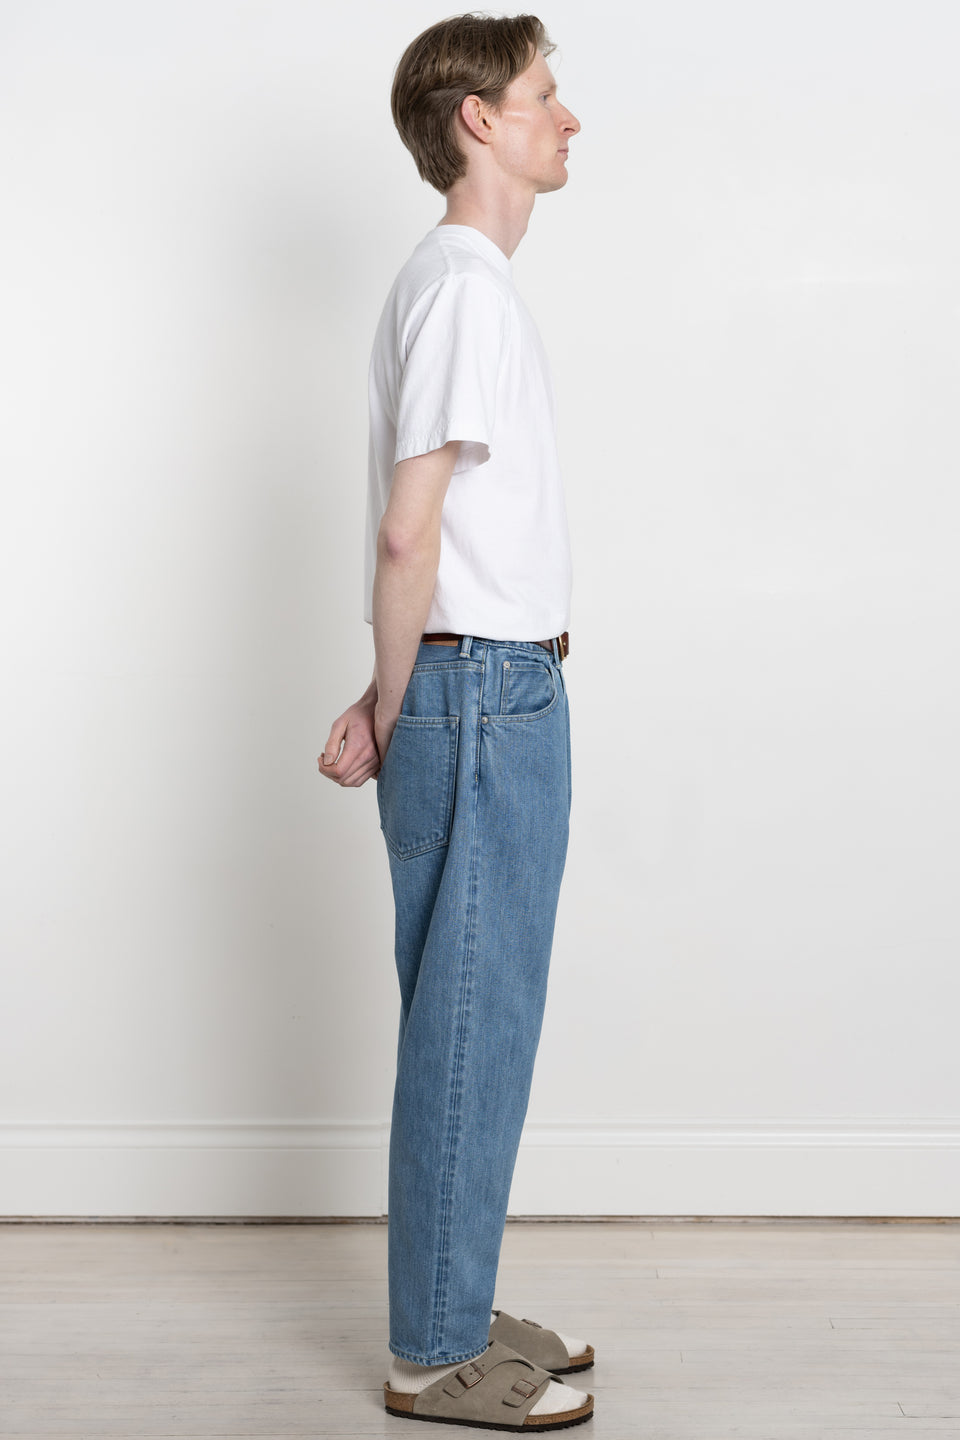 HATSKI Made in Japan 24SS Men's Collection Loose Tapered Selvedge Denim Used / Ice Blue Calculus Victoria BC Canada